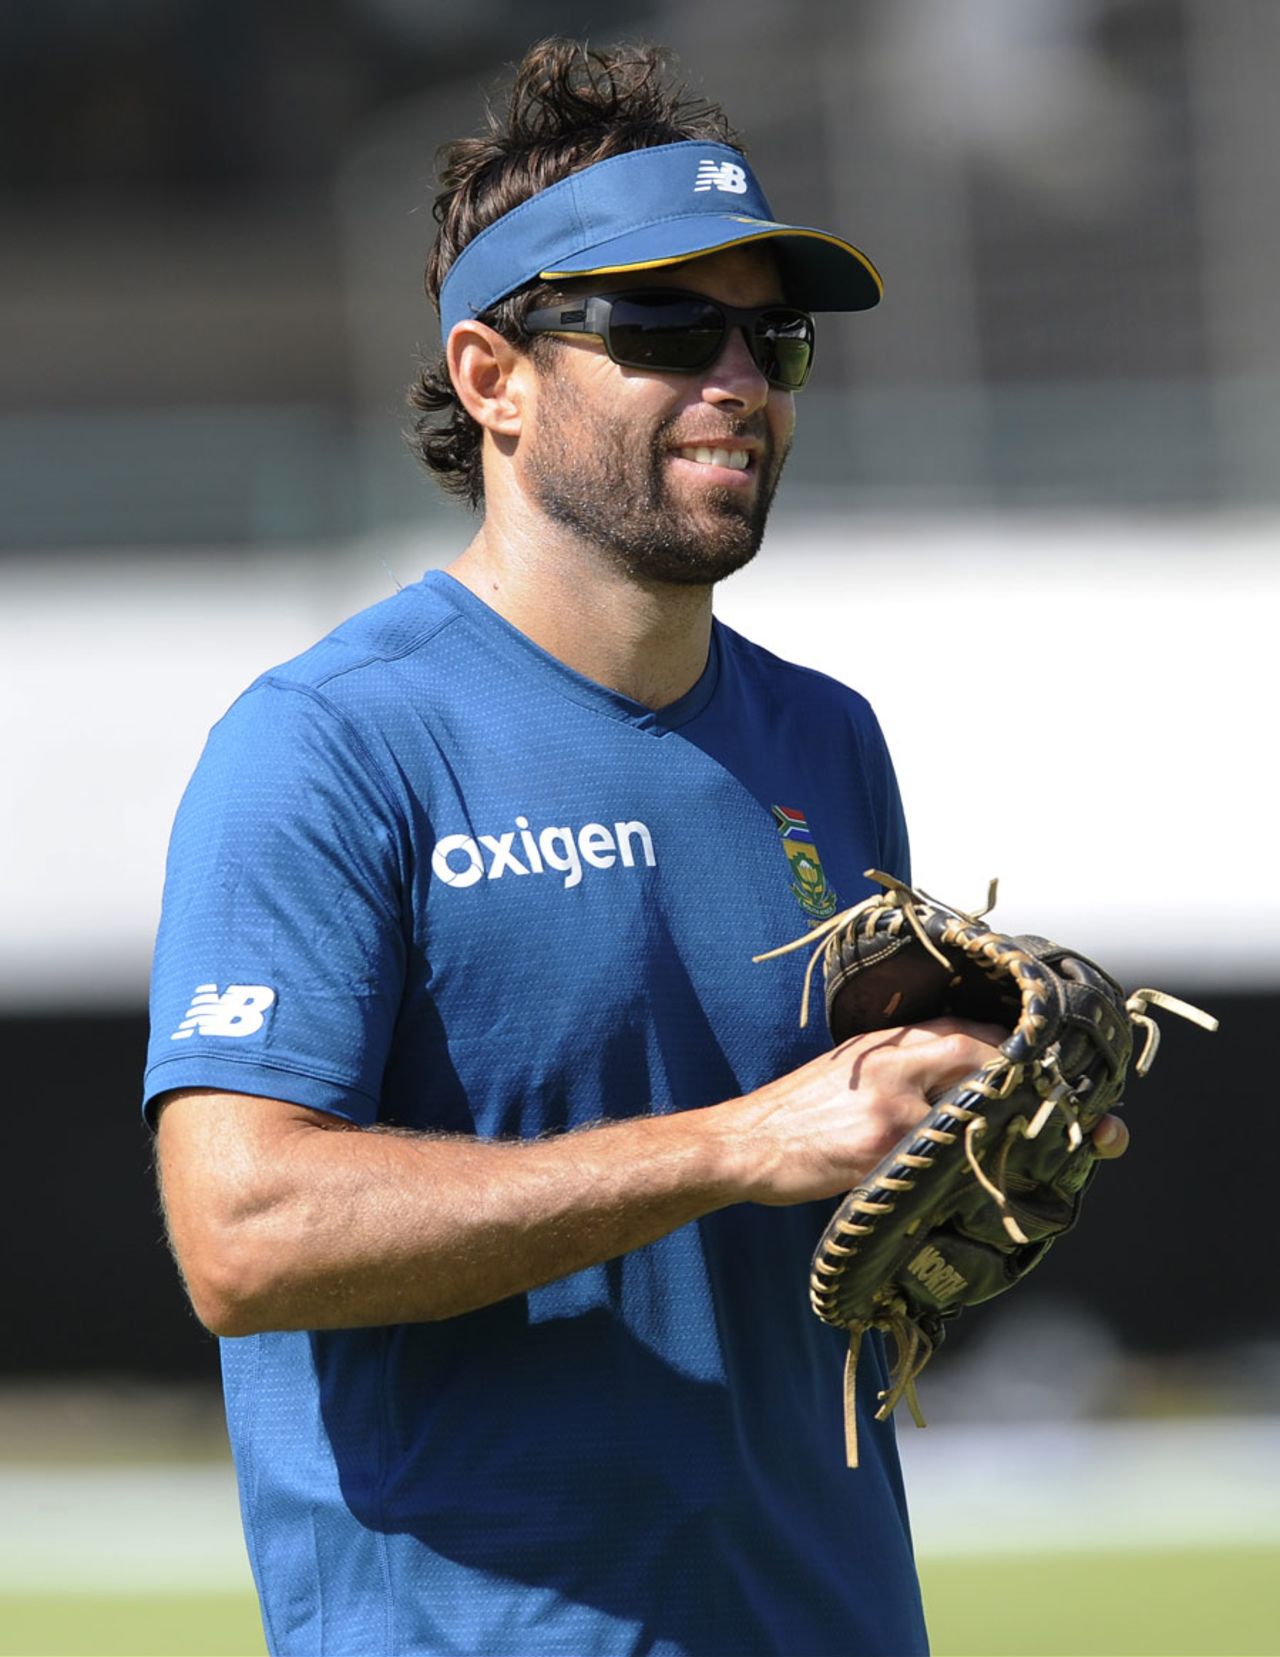 Neil McKenzie started his new job as South Africa's batting coach, Cape Town, February 18, 2016